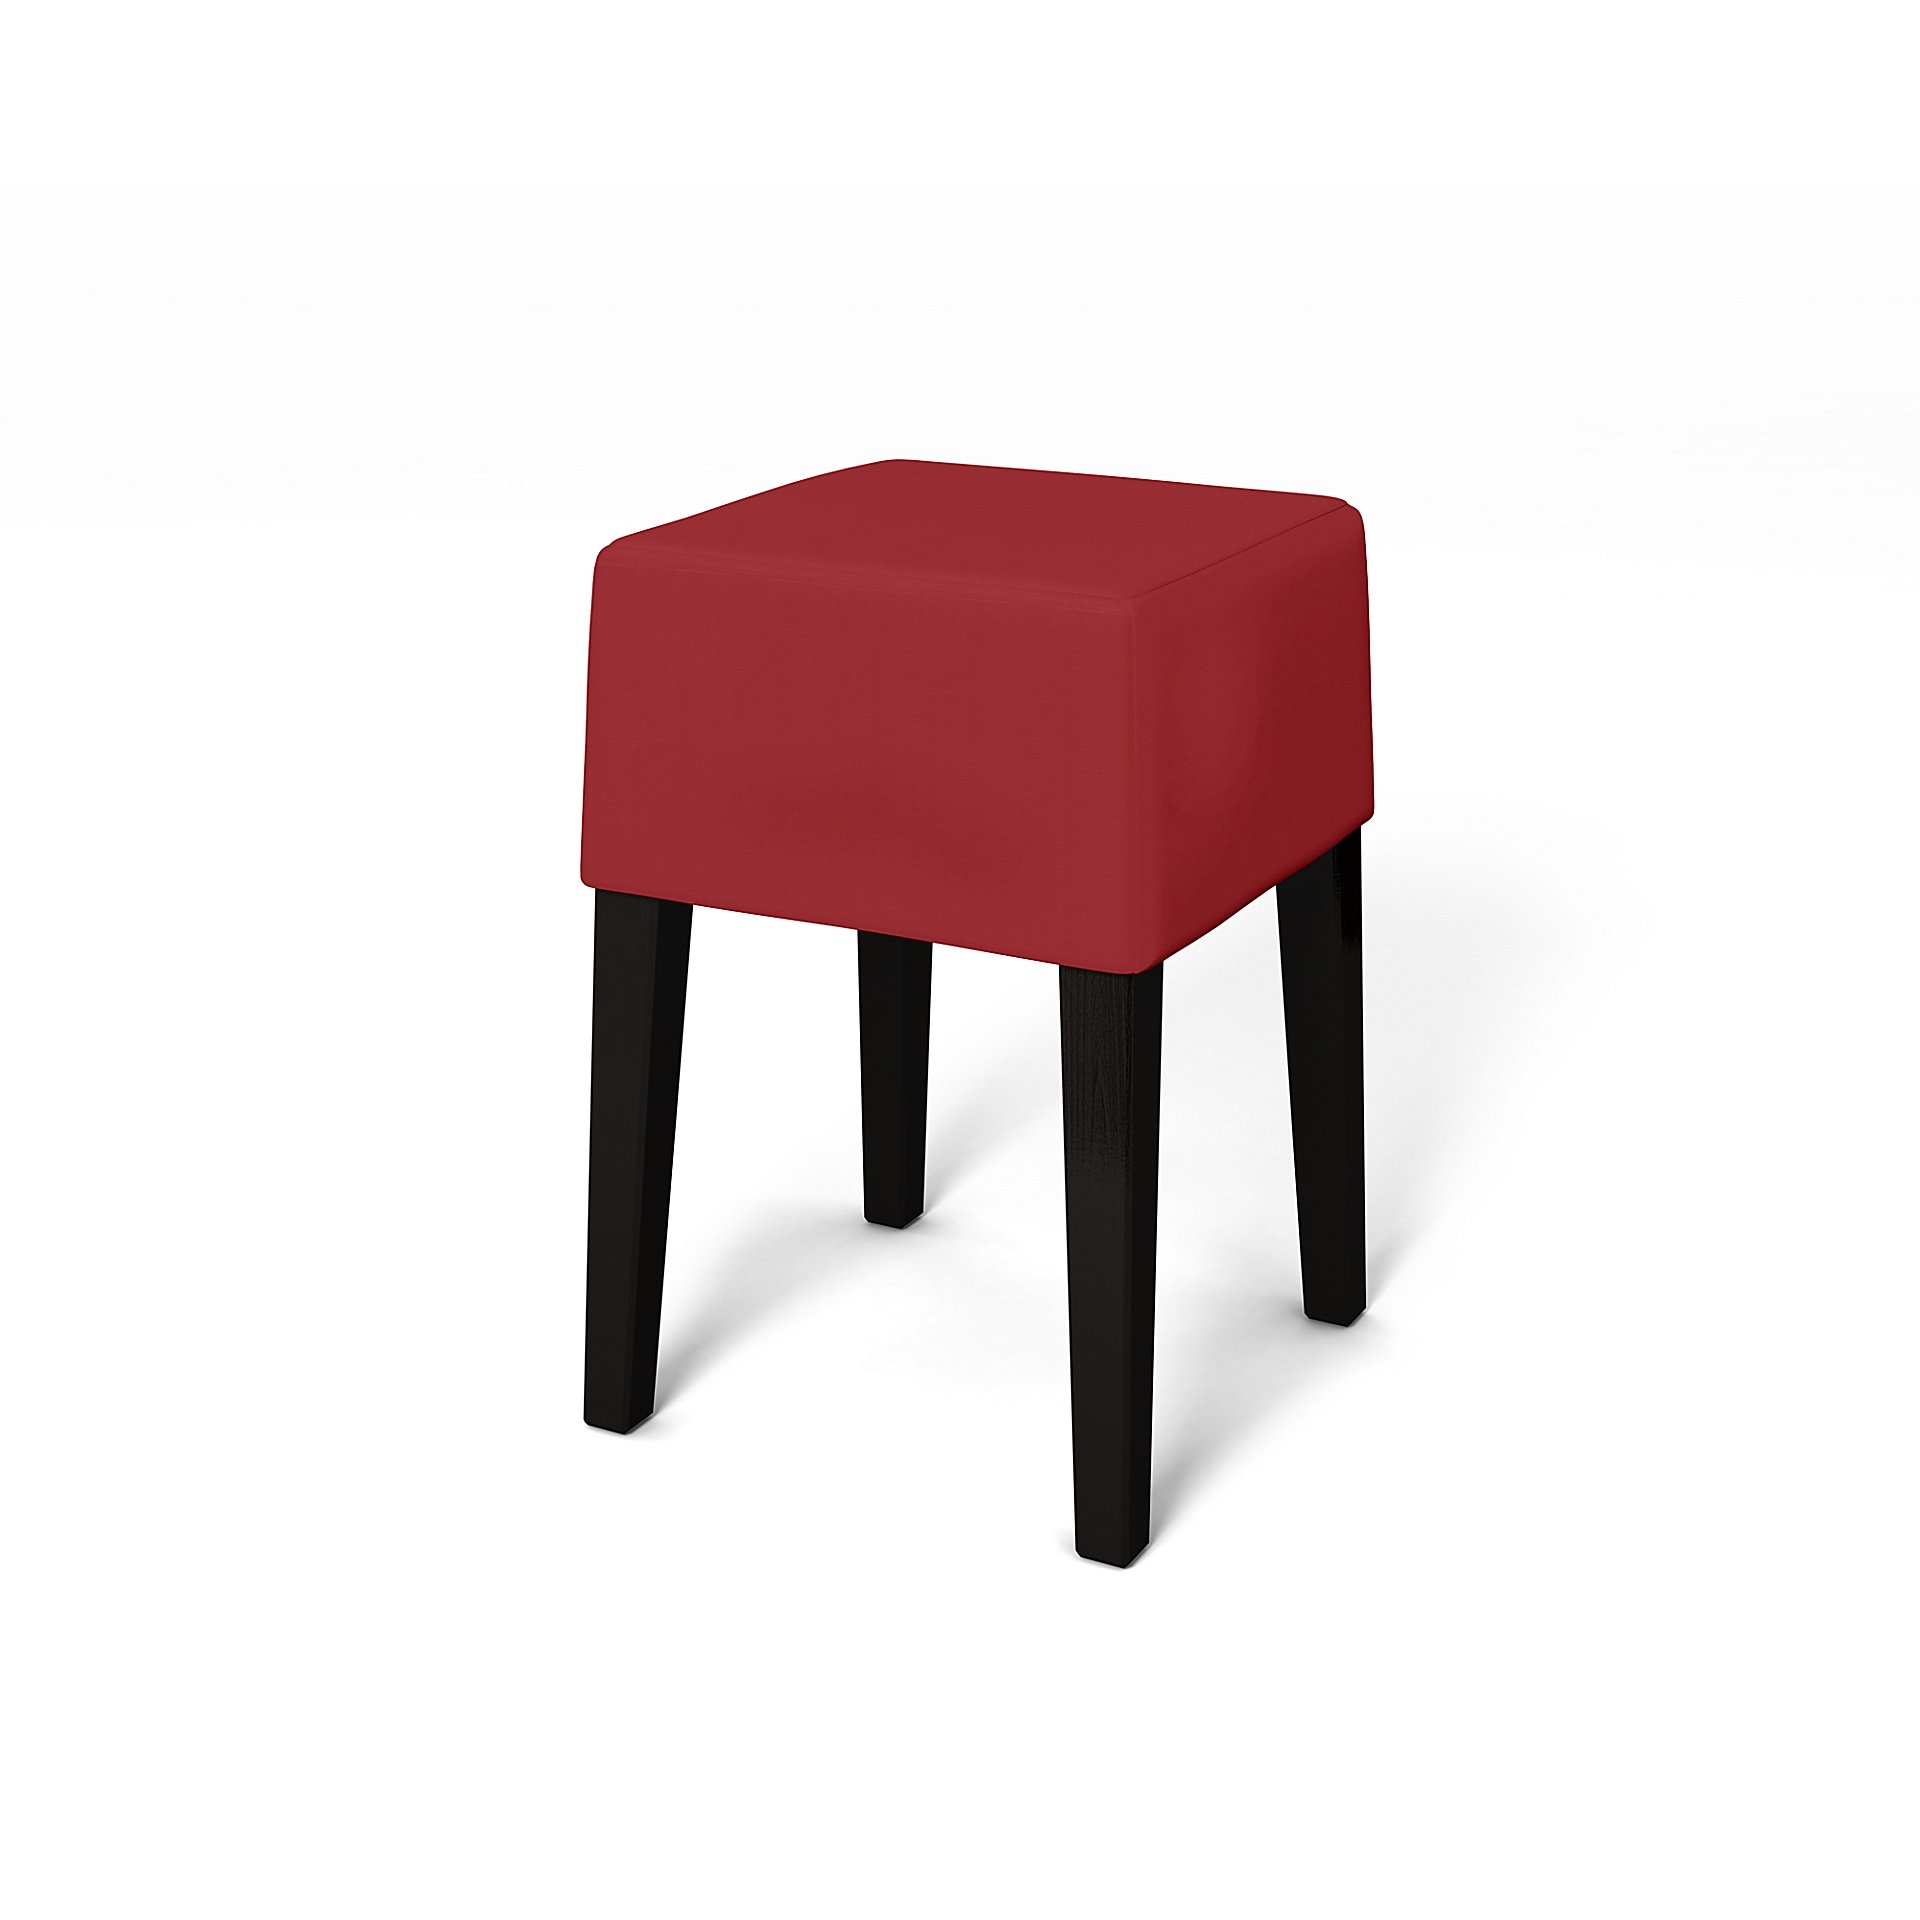 IKEA - Nils Stool Cover, Scarlet Red, Cotton - Bemz